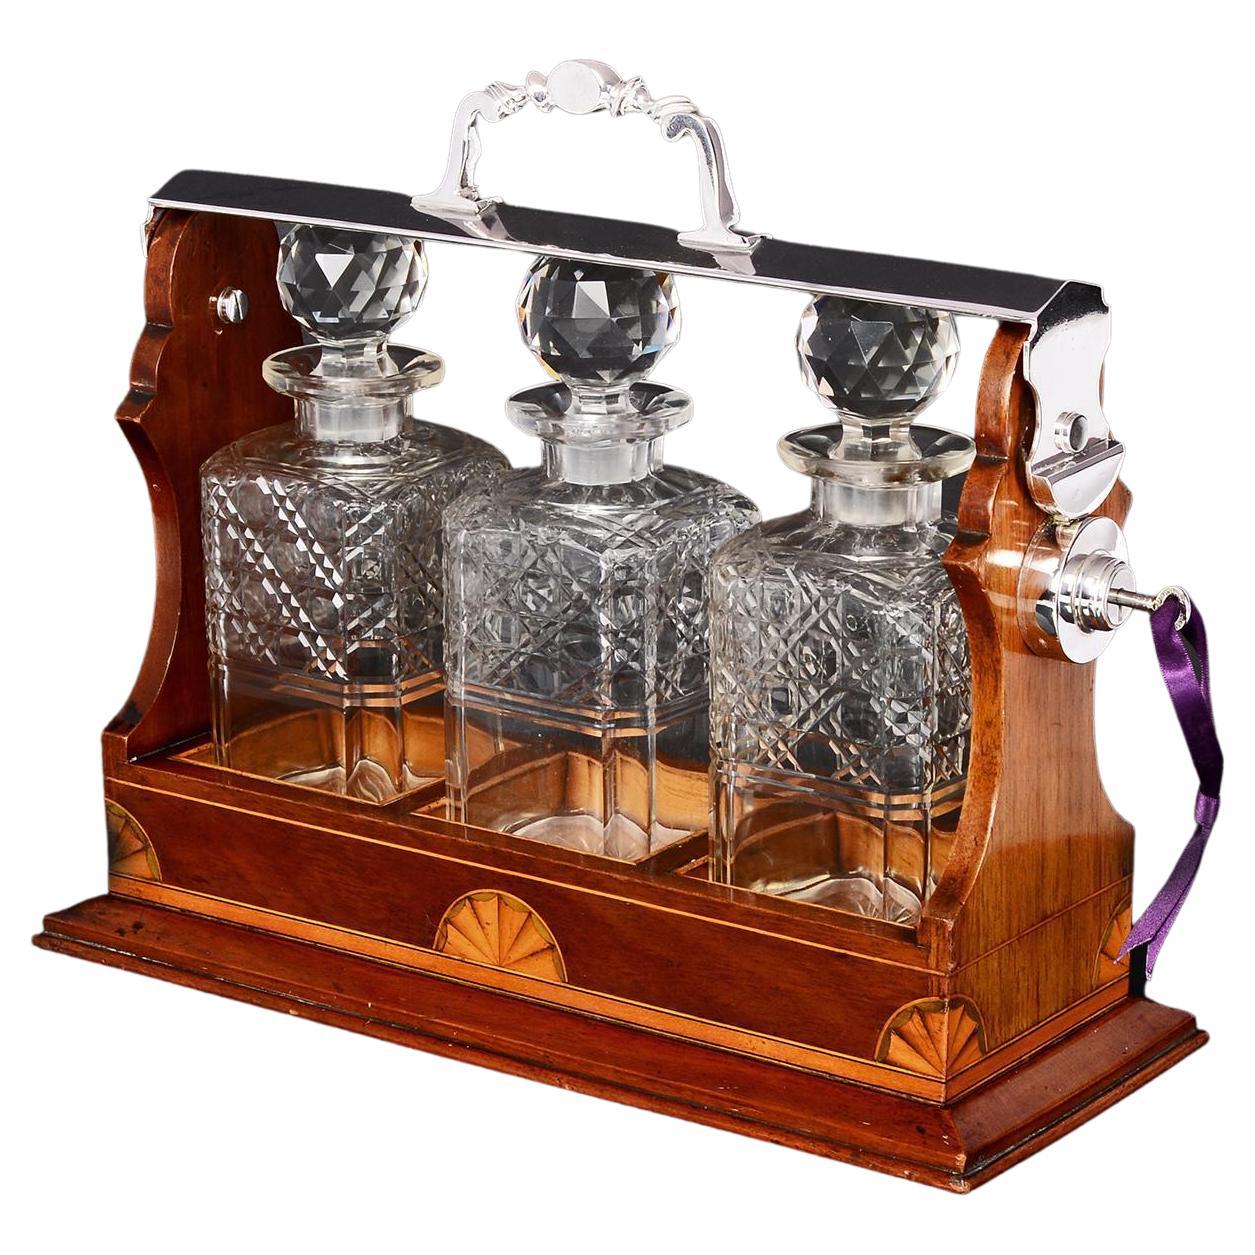 Two Decanter Tantalus In Solid Oak Frame With Brass Fittings